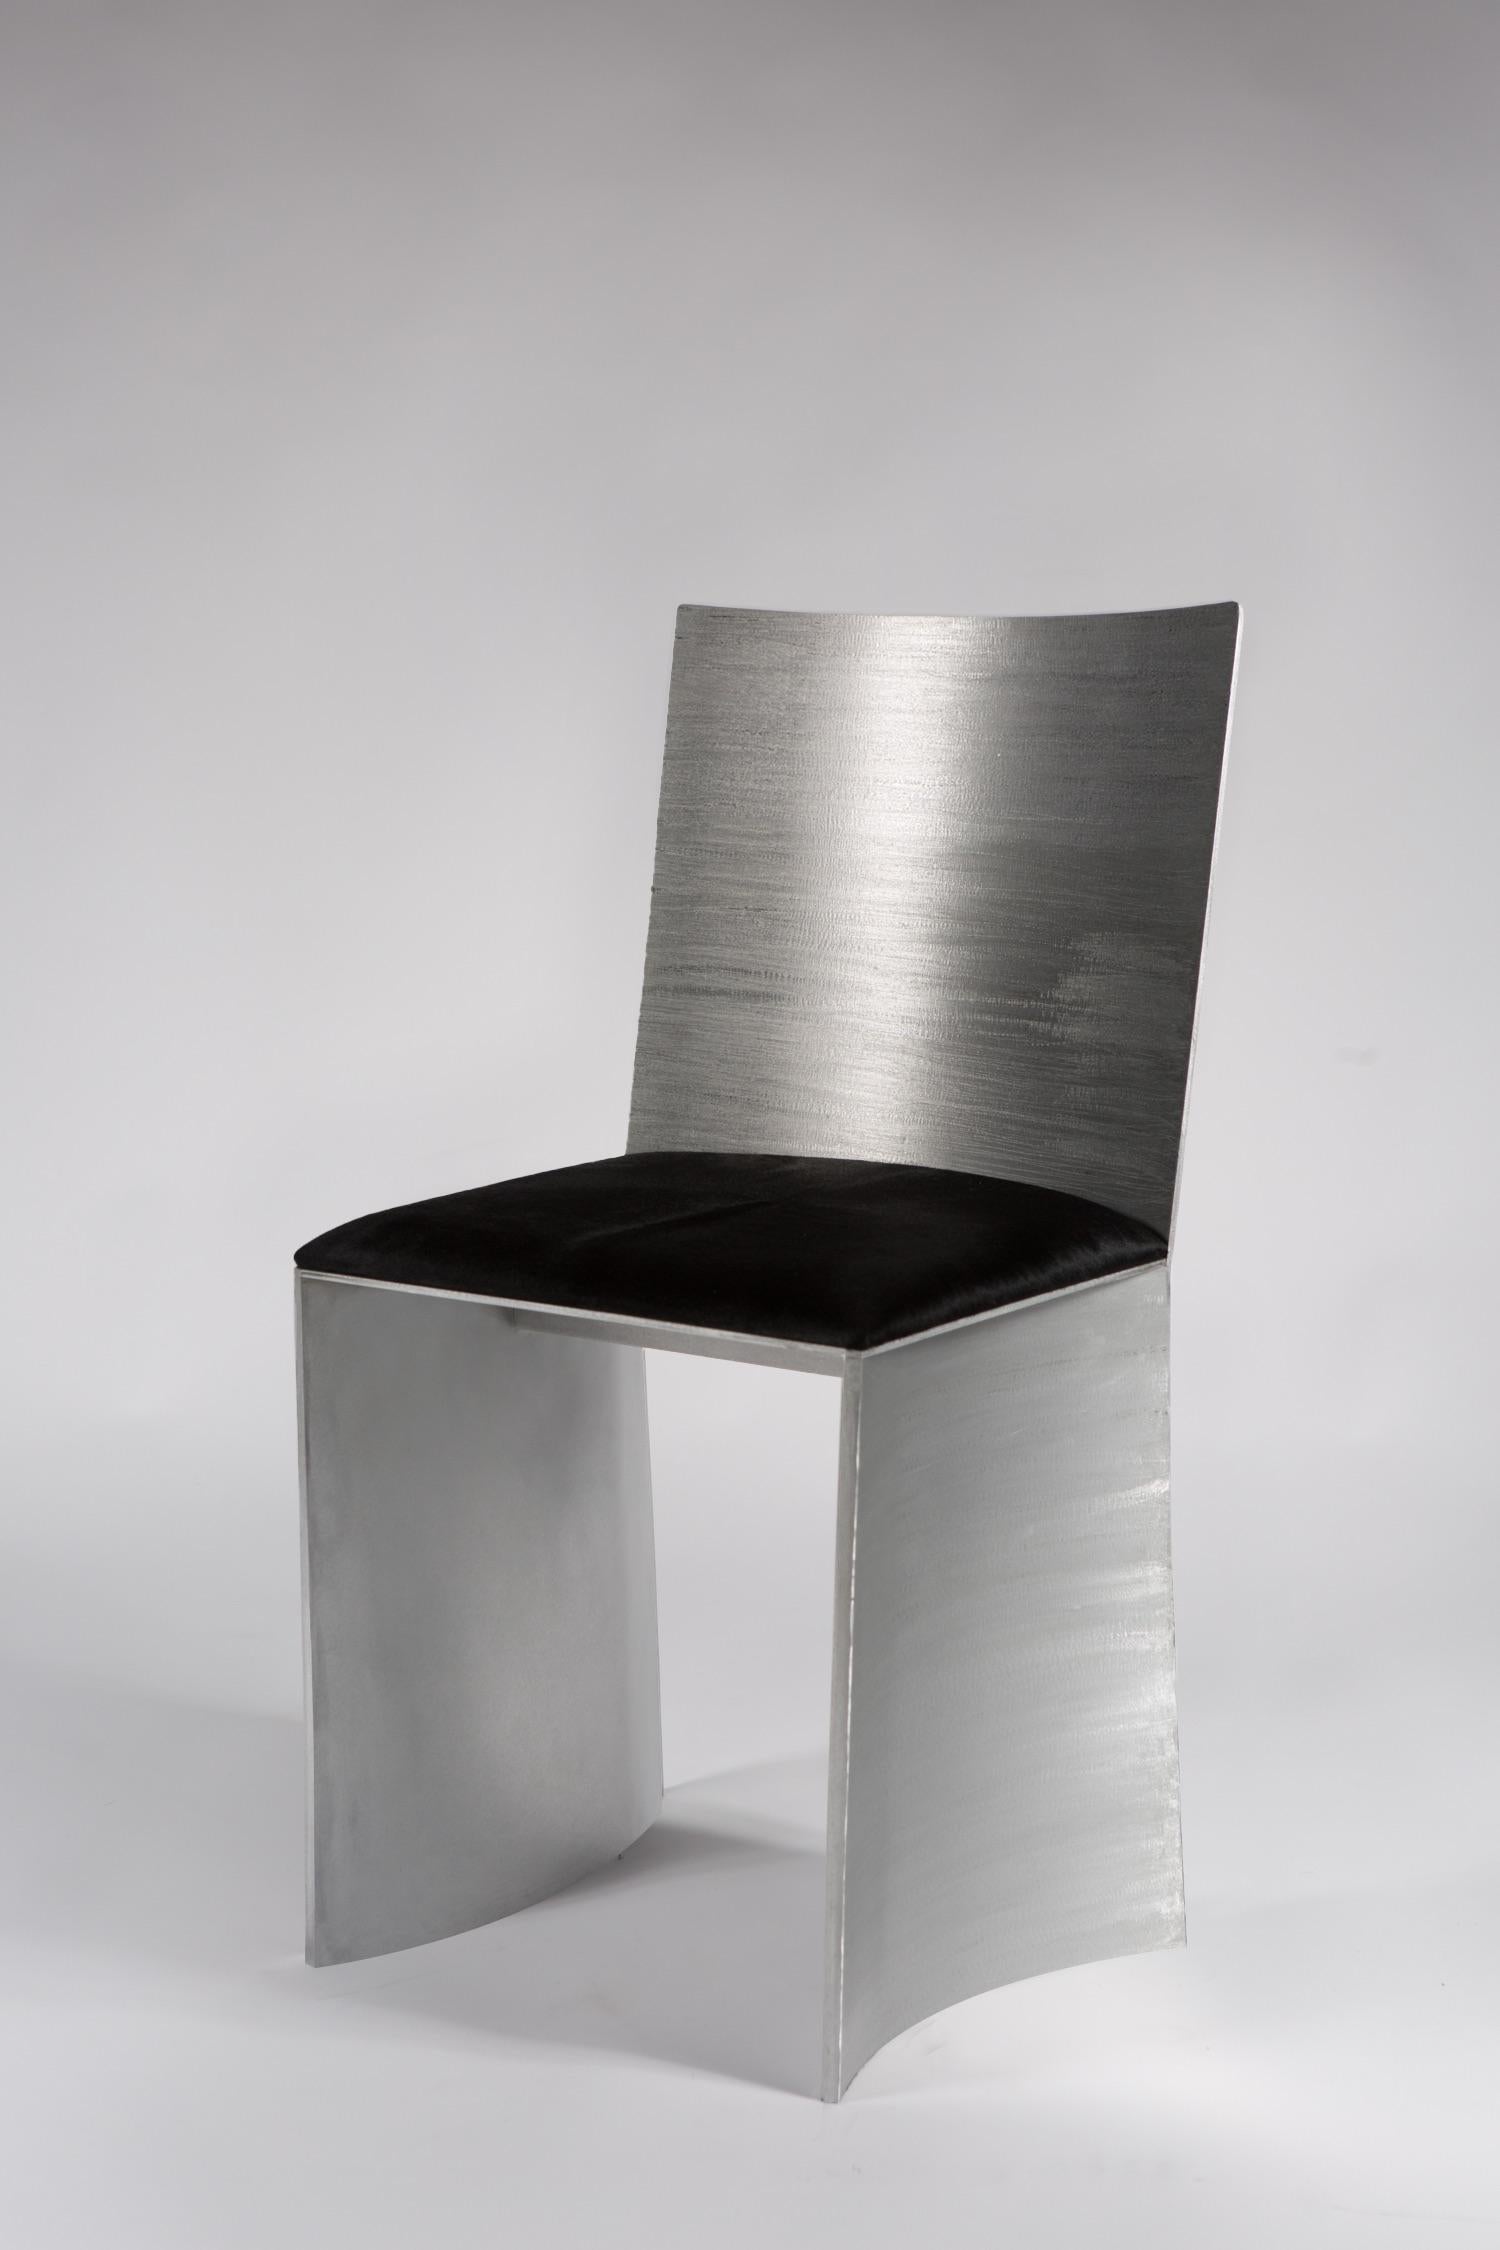 American ISU Lowback Handcrafted Textured Satin Metal Chair by Soraya Osorio For Sale